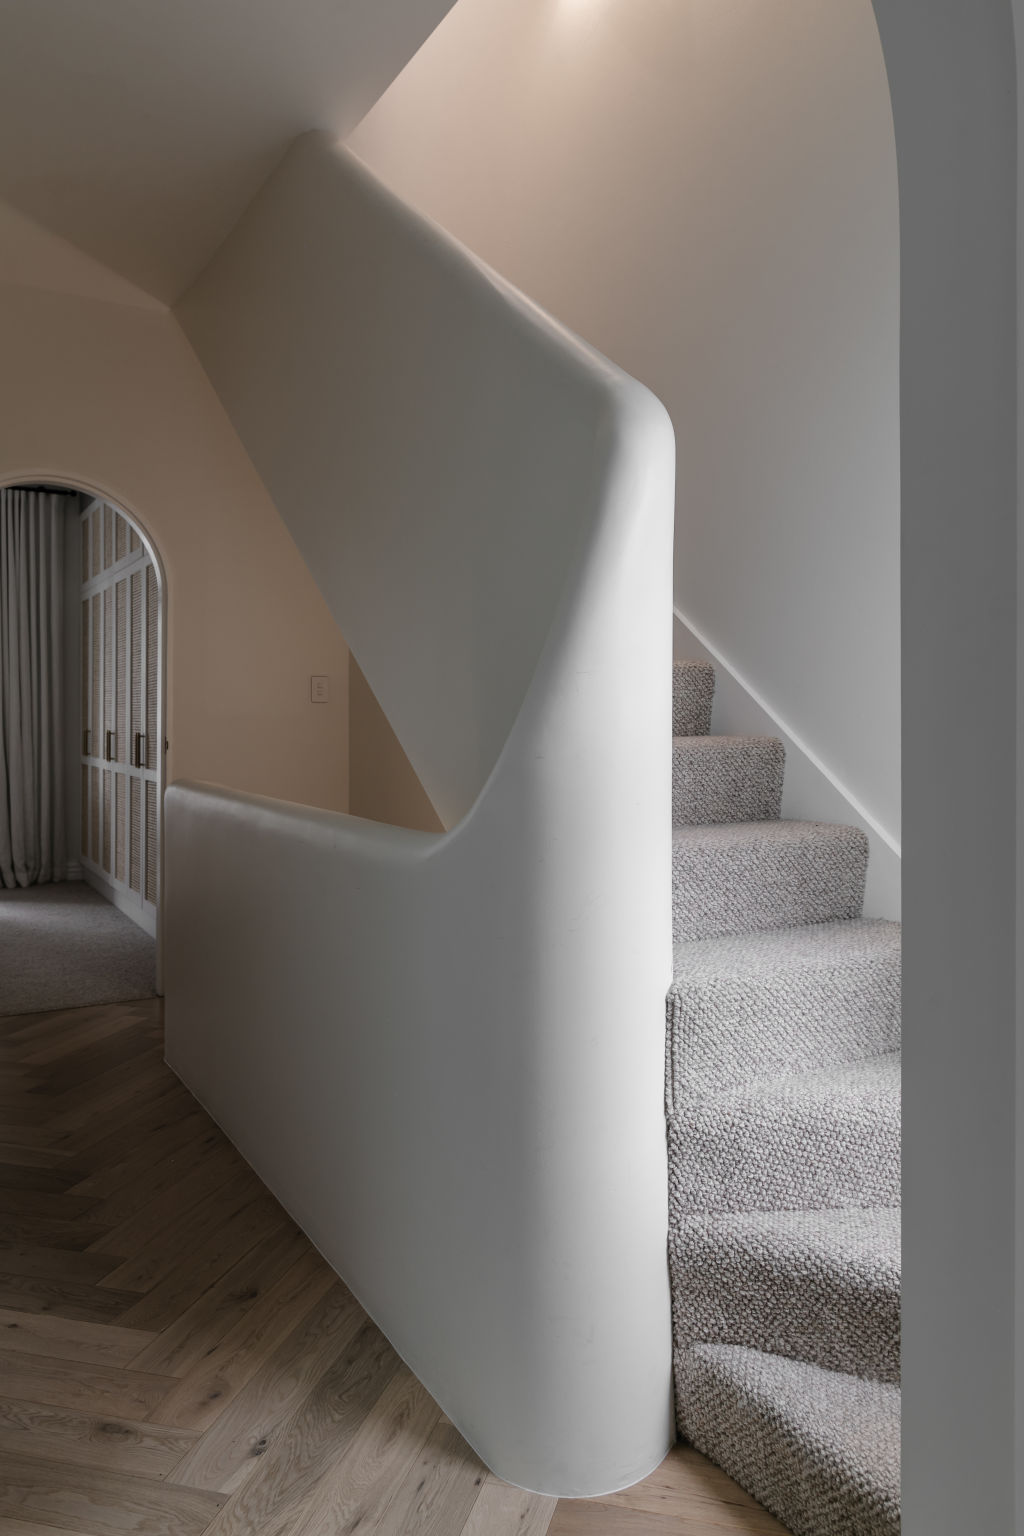 They got rid of the rickety old staircase and replaced it with a Mediterranean-style curved plaster one. Photo: Trudy Pagden